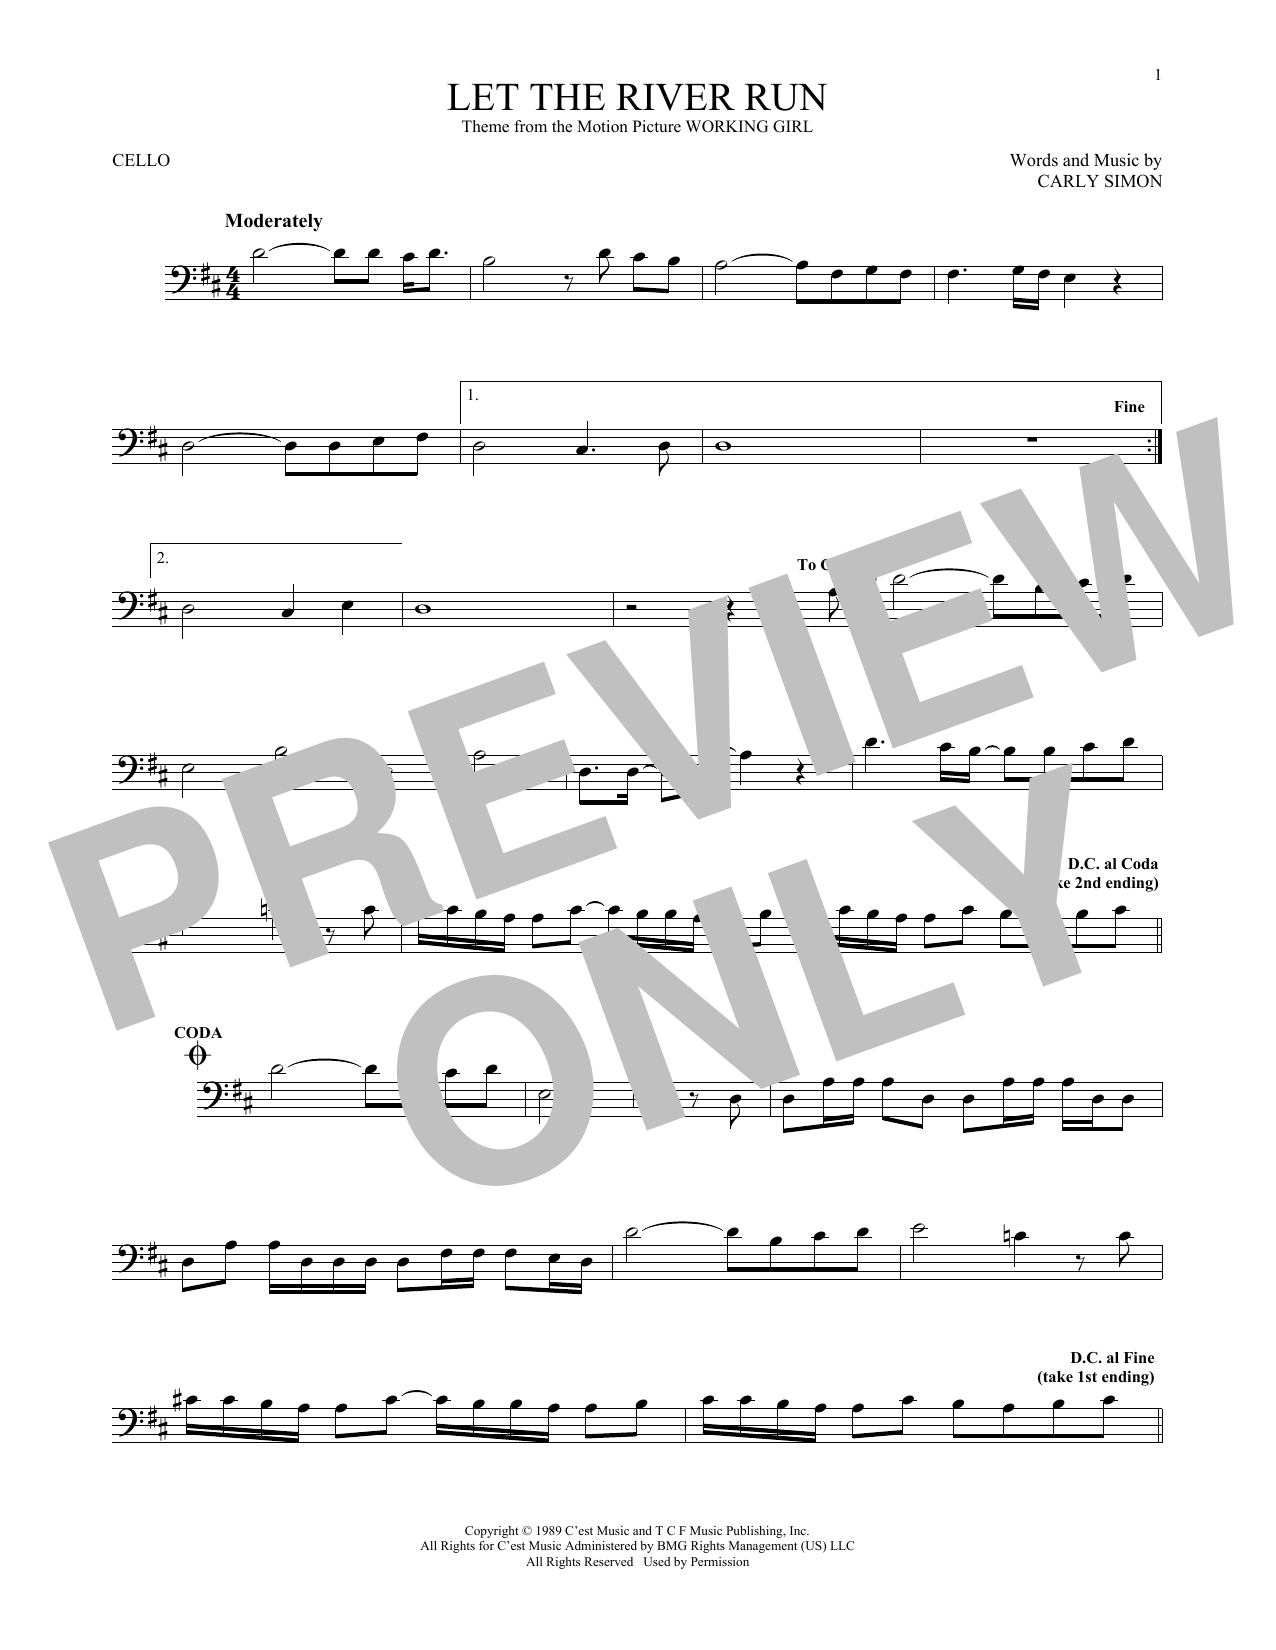 Download Carly Simon Let The River Run Sheet Music